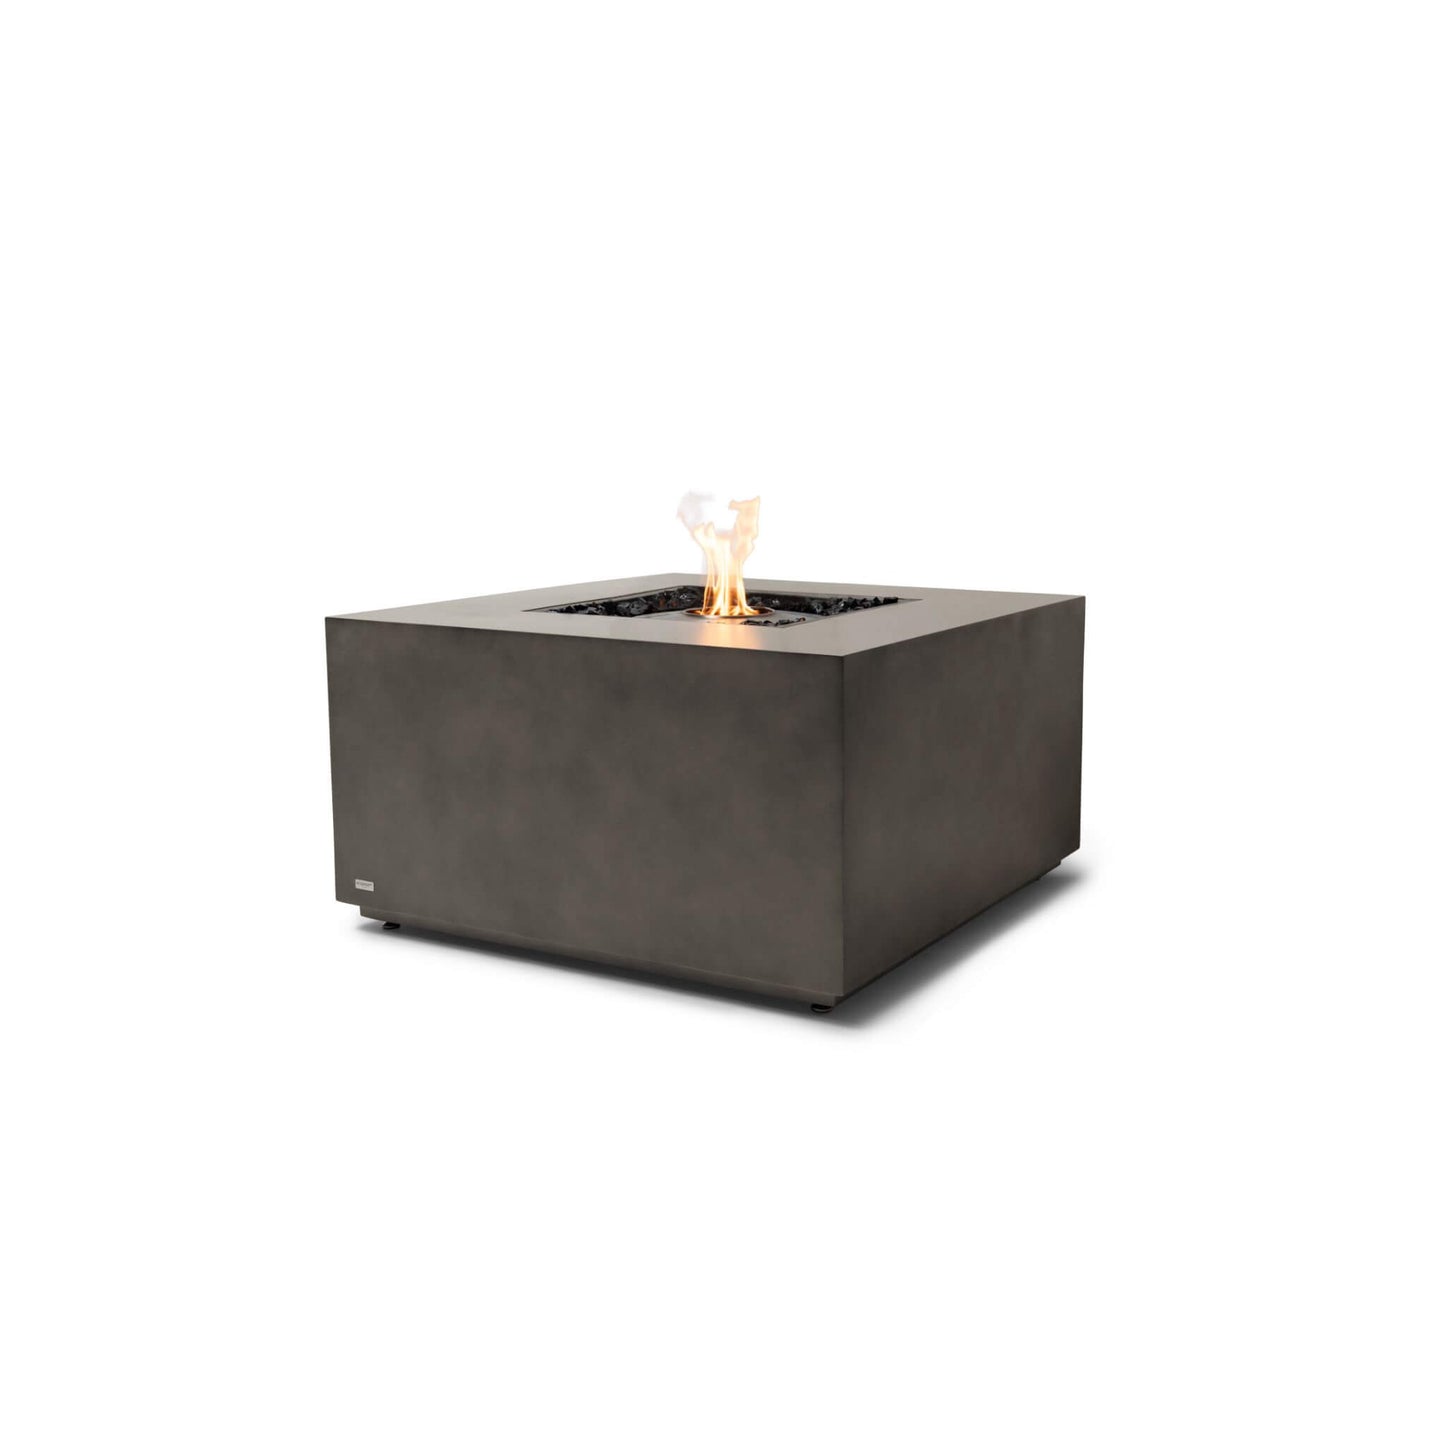 Ecosmart Fire Chaser 38 Concrete Bioethanol Fire Pit Table